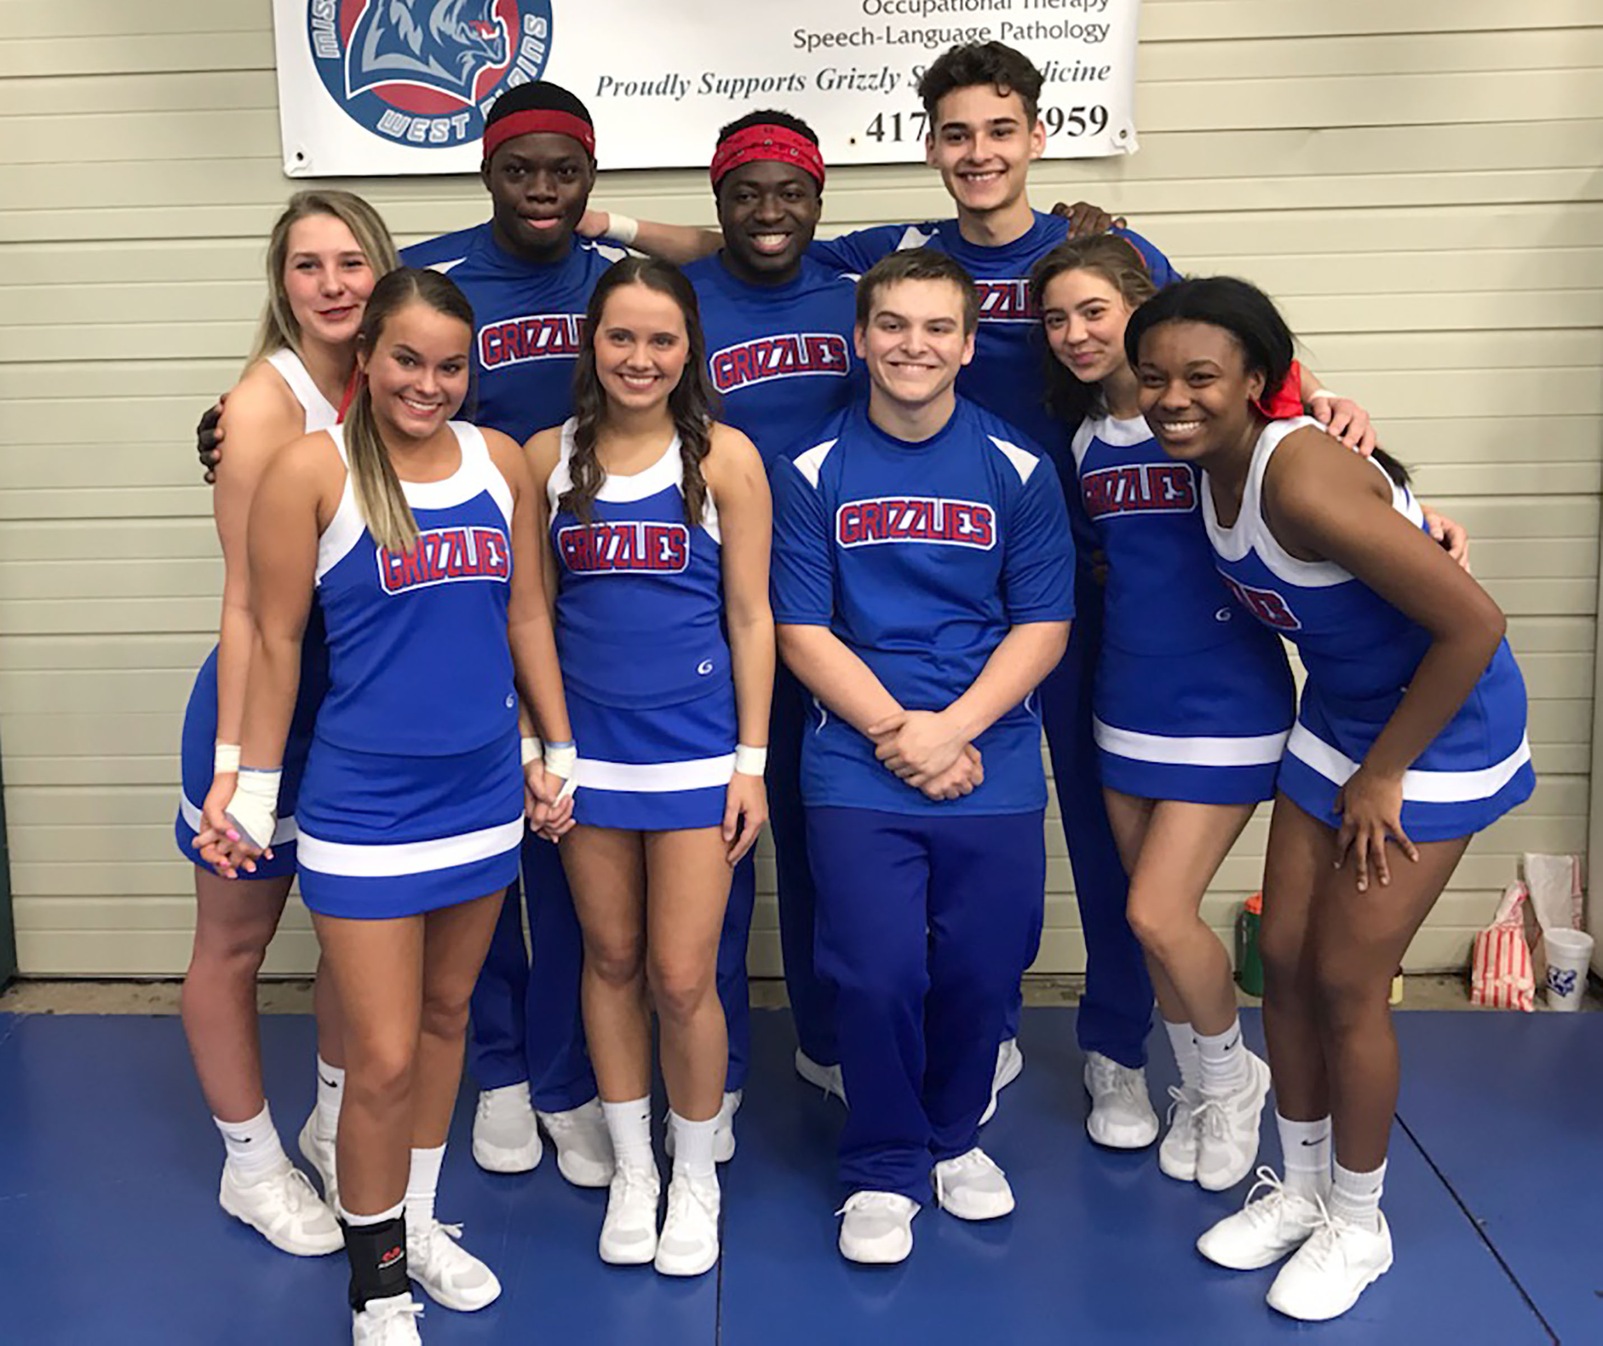 This year’s sophomores include, front row from left, Ashlyn Williams, Morrisville; Paige Rollins, Licking; Robert Cavitt and Jaden Brotherton, both of West Plains; and Anya Phipps, St. Louis. Back row: Chrissy Langston, Spokane; Jamal Shaddid, St. Louis; Omenka Nwasoria, Kansas City; and Christian Leslie, West Plains. (Missouri State-West Plains Photo)